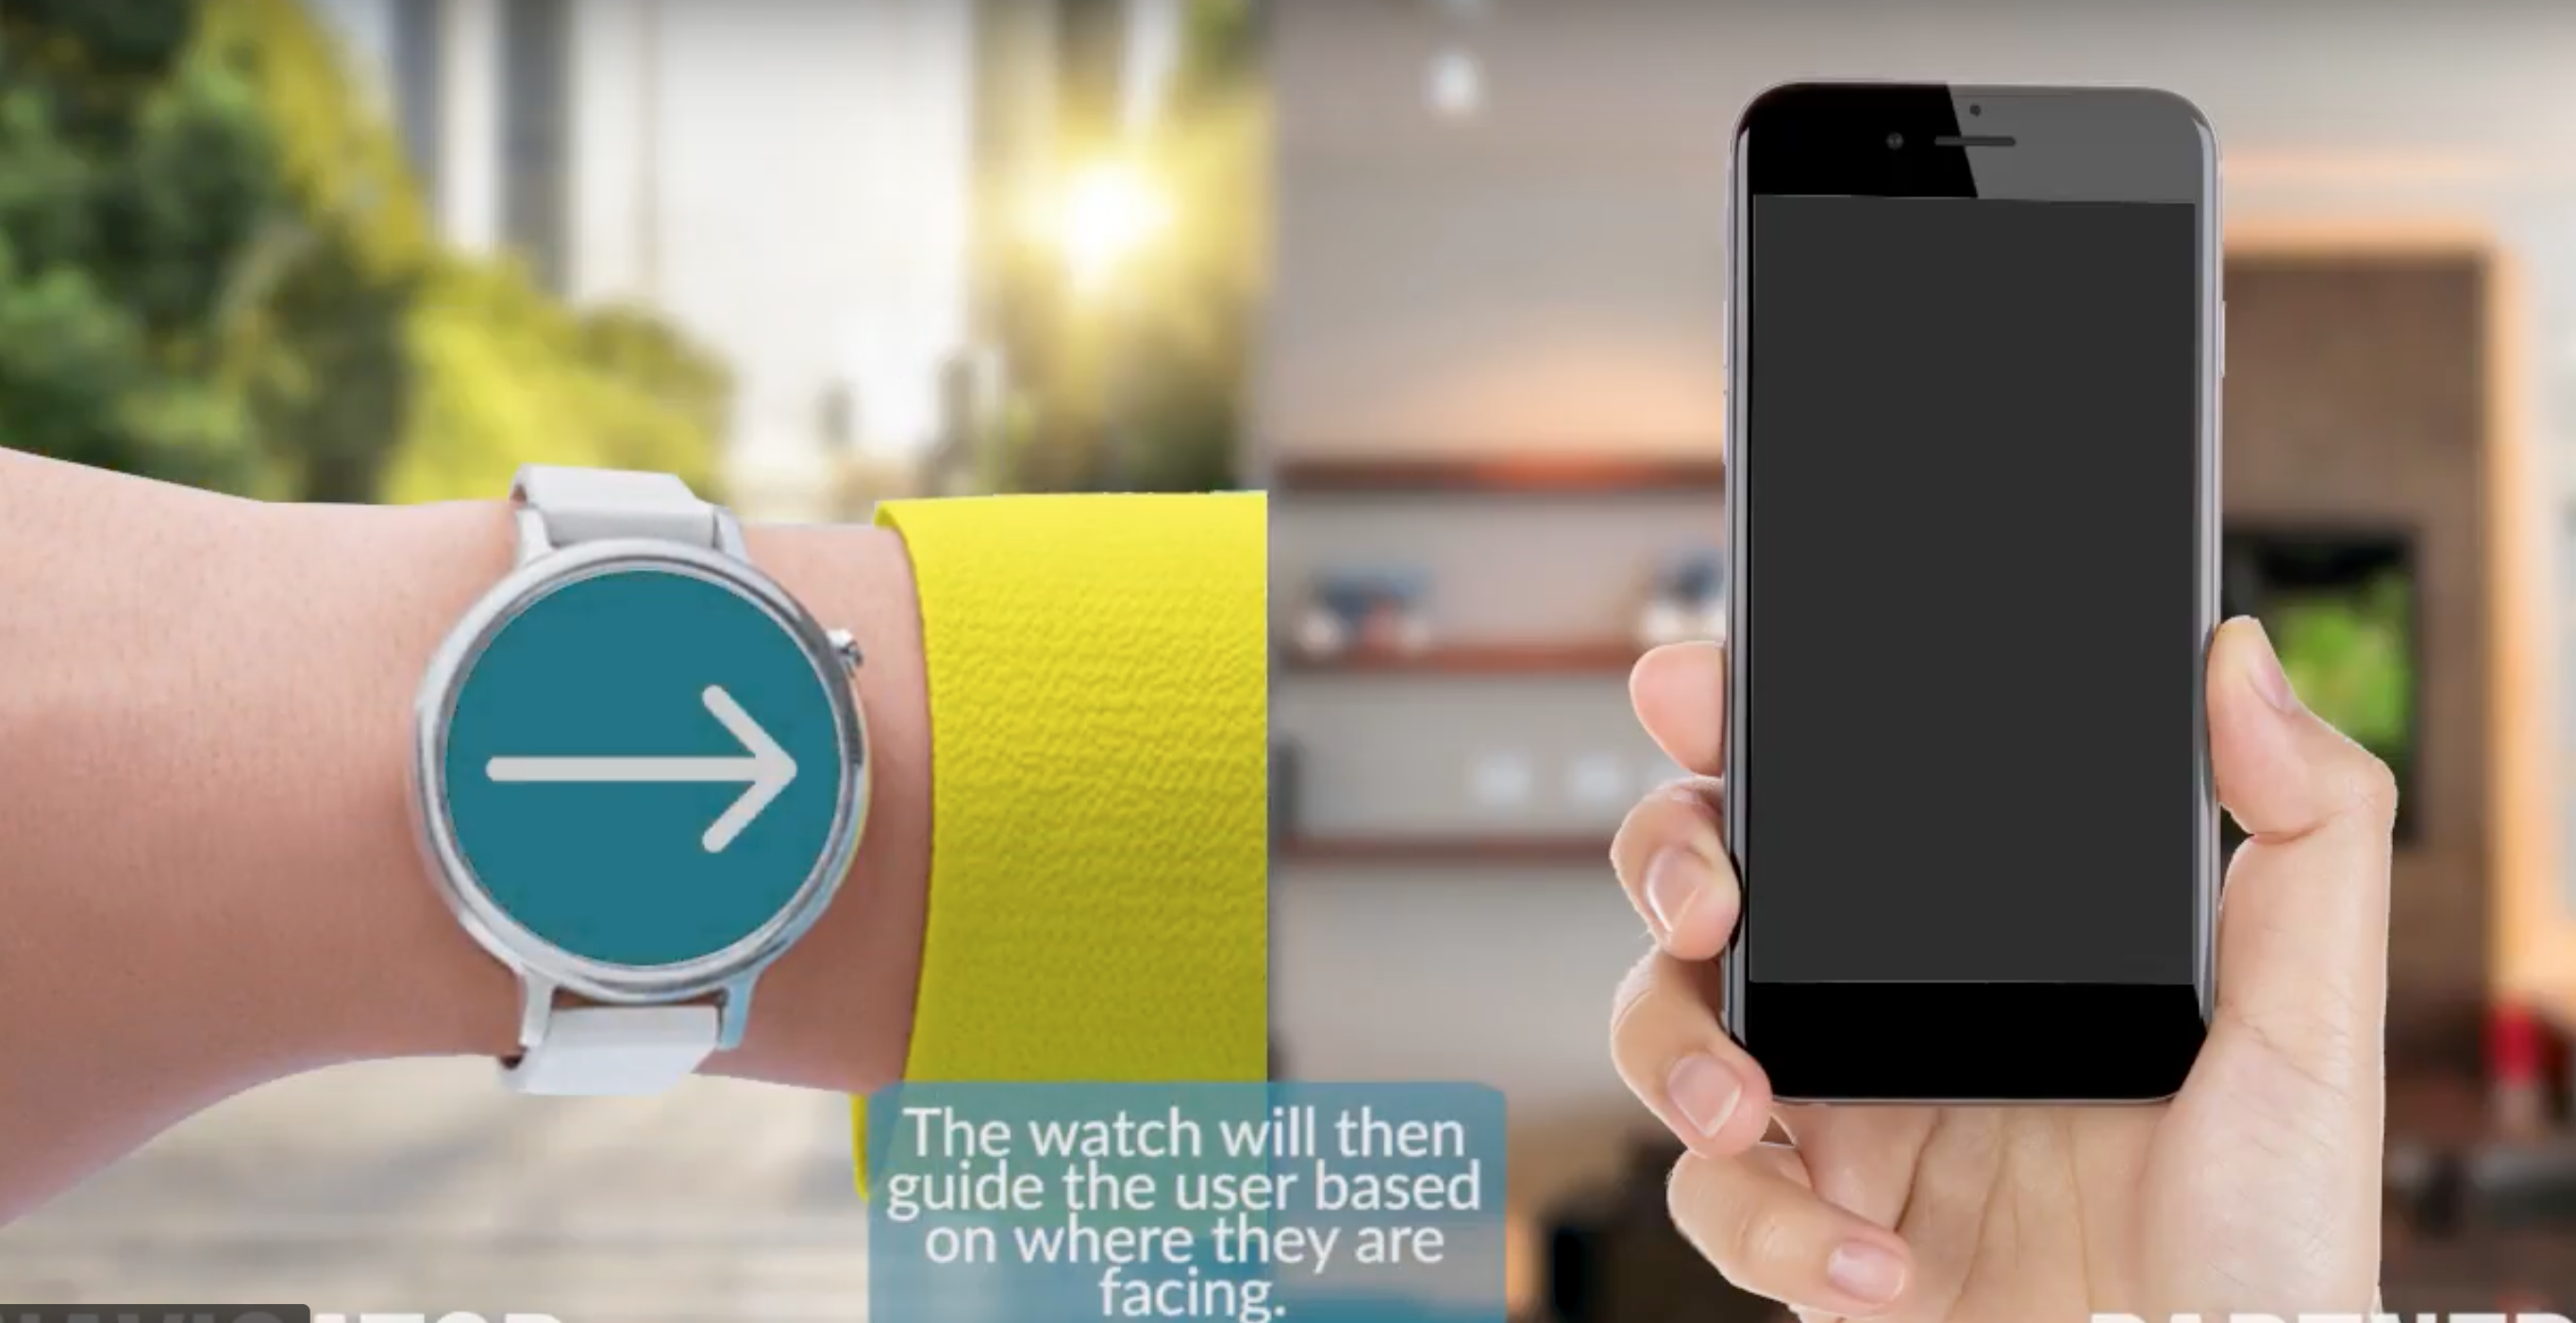 Way2B smartwatch receives navigation instructions from smartphone